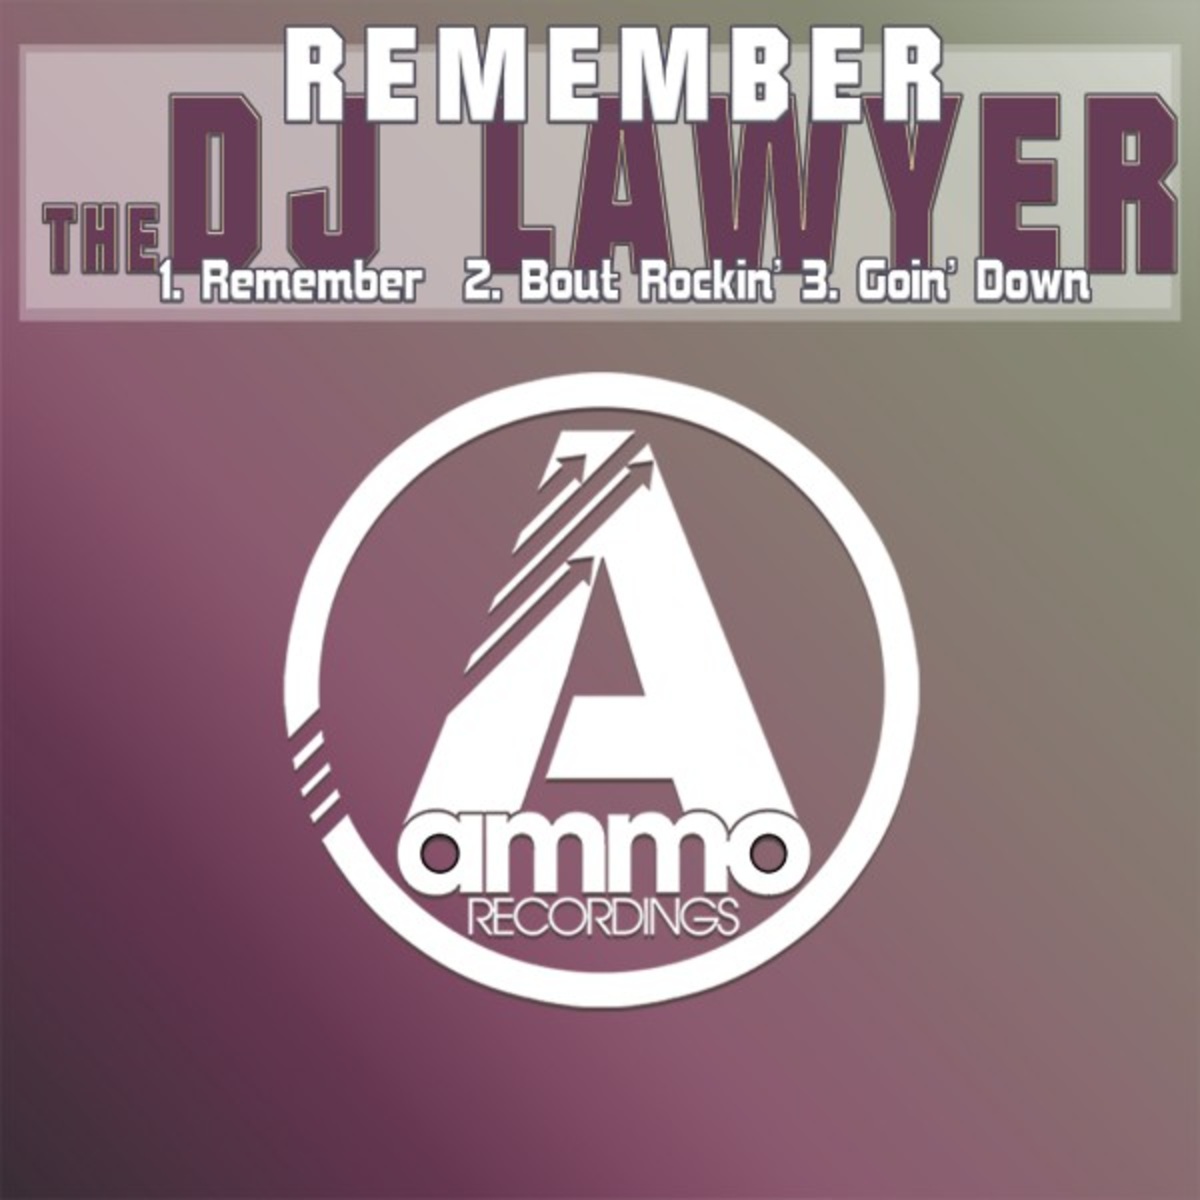 TheDJLawyer - Remember / Ammo Recordings